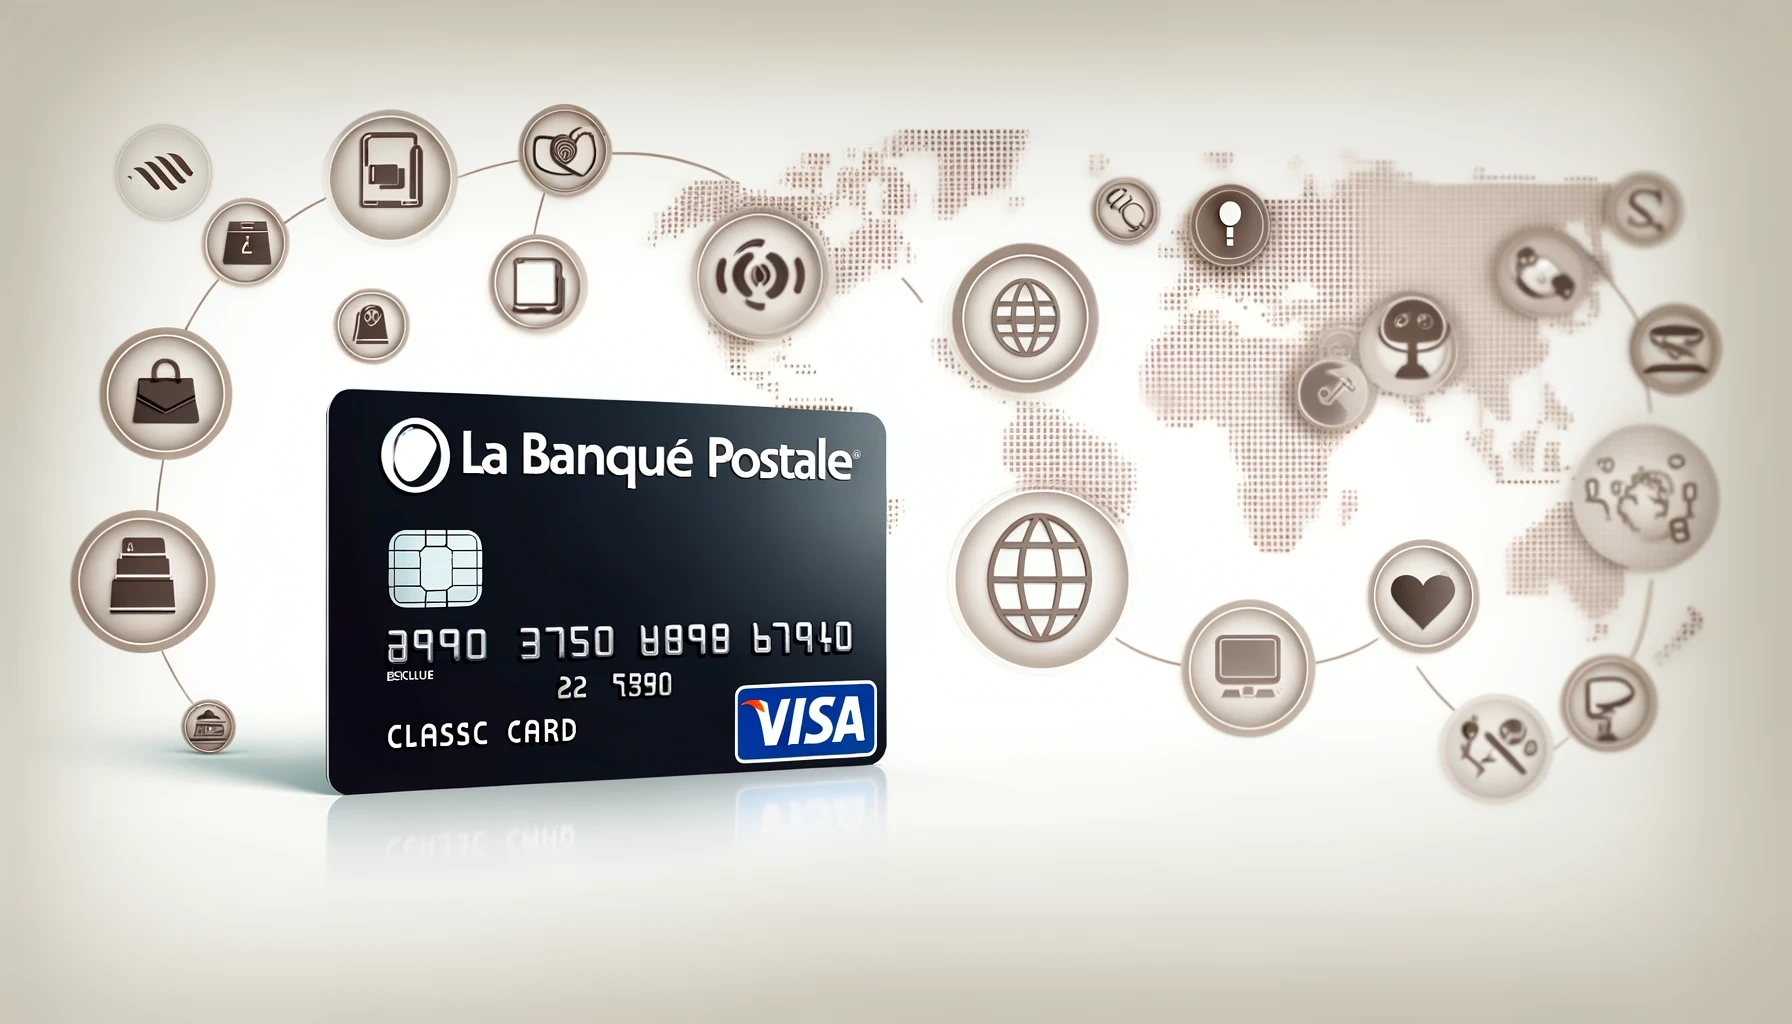 Learn How to Apply for Visa Classic at La Banque Postale Online 